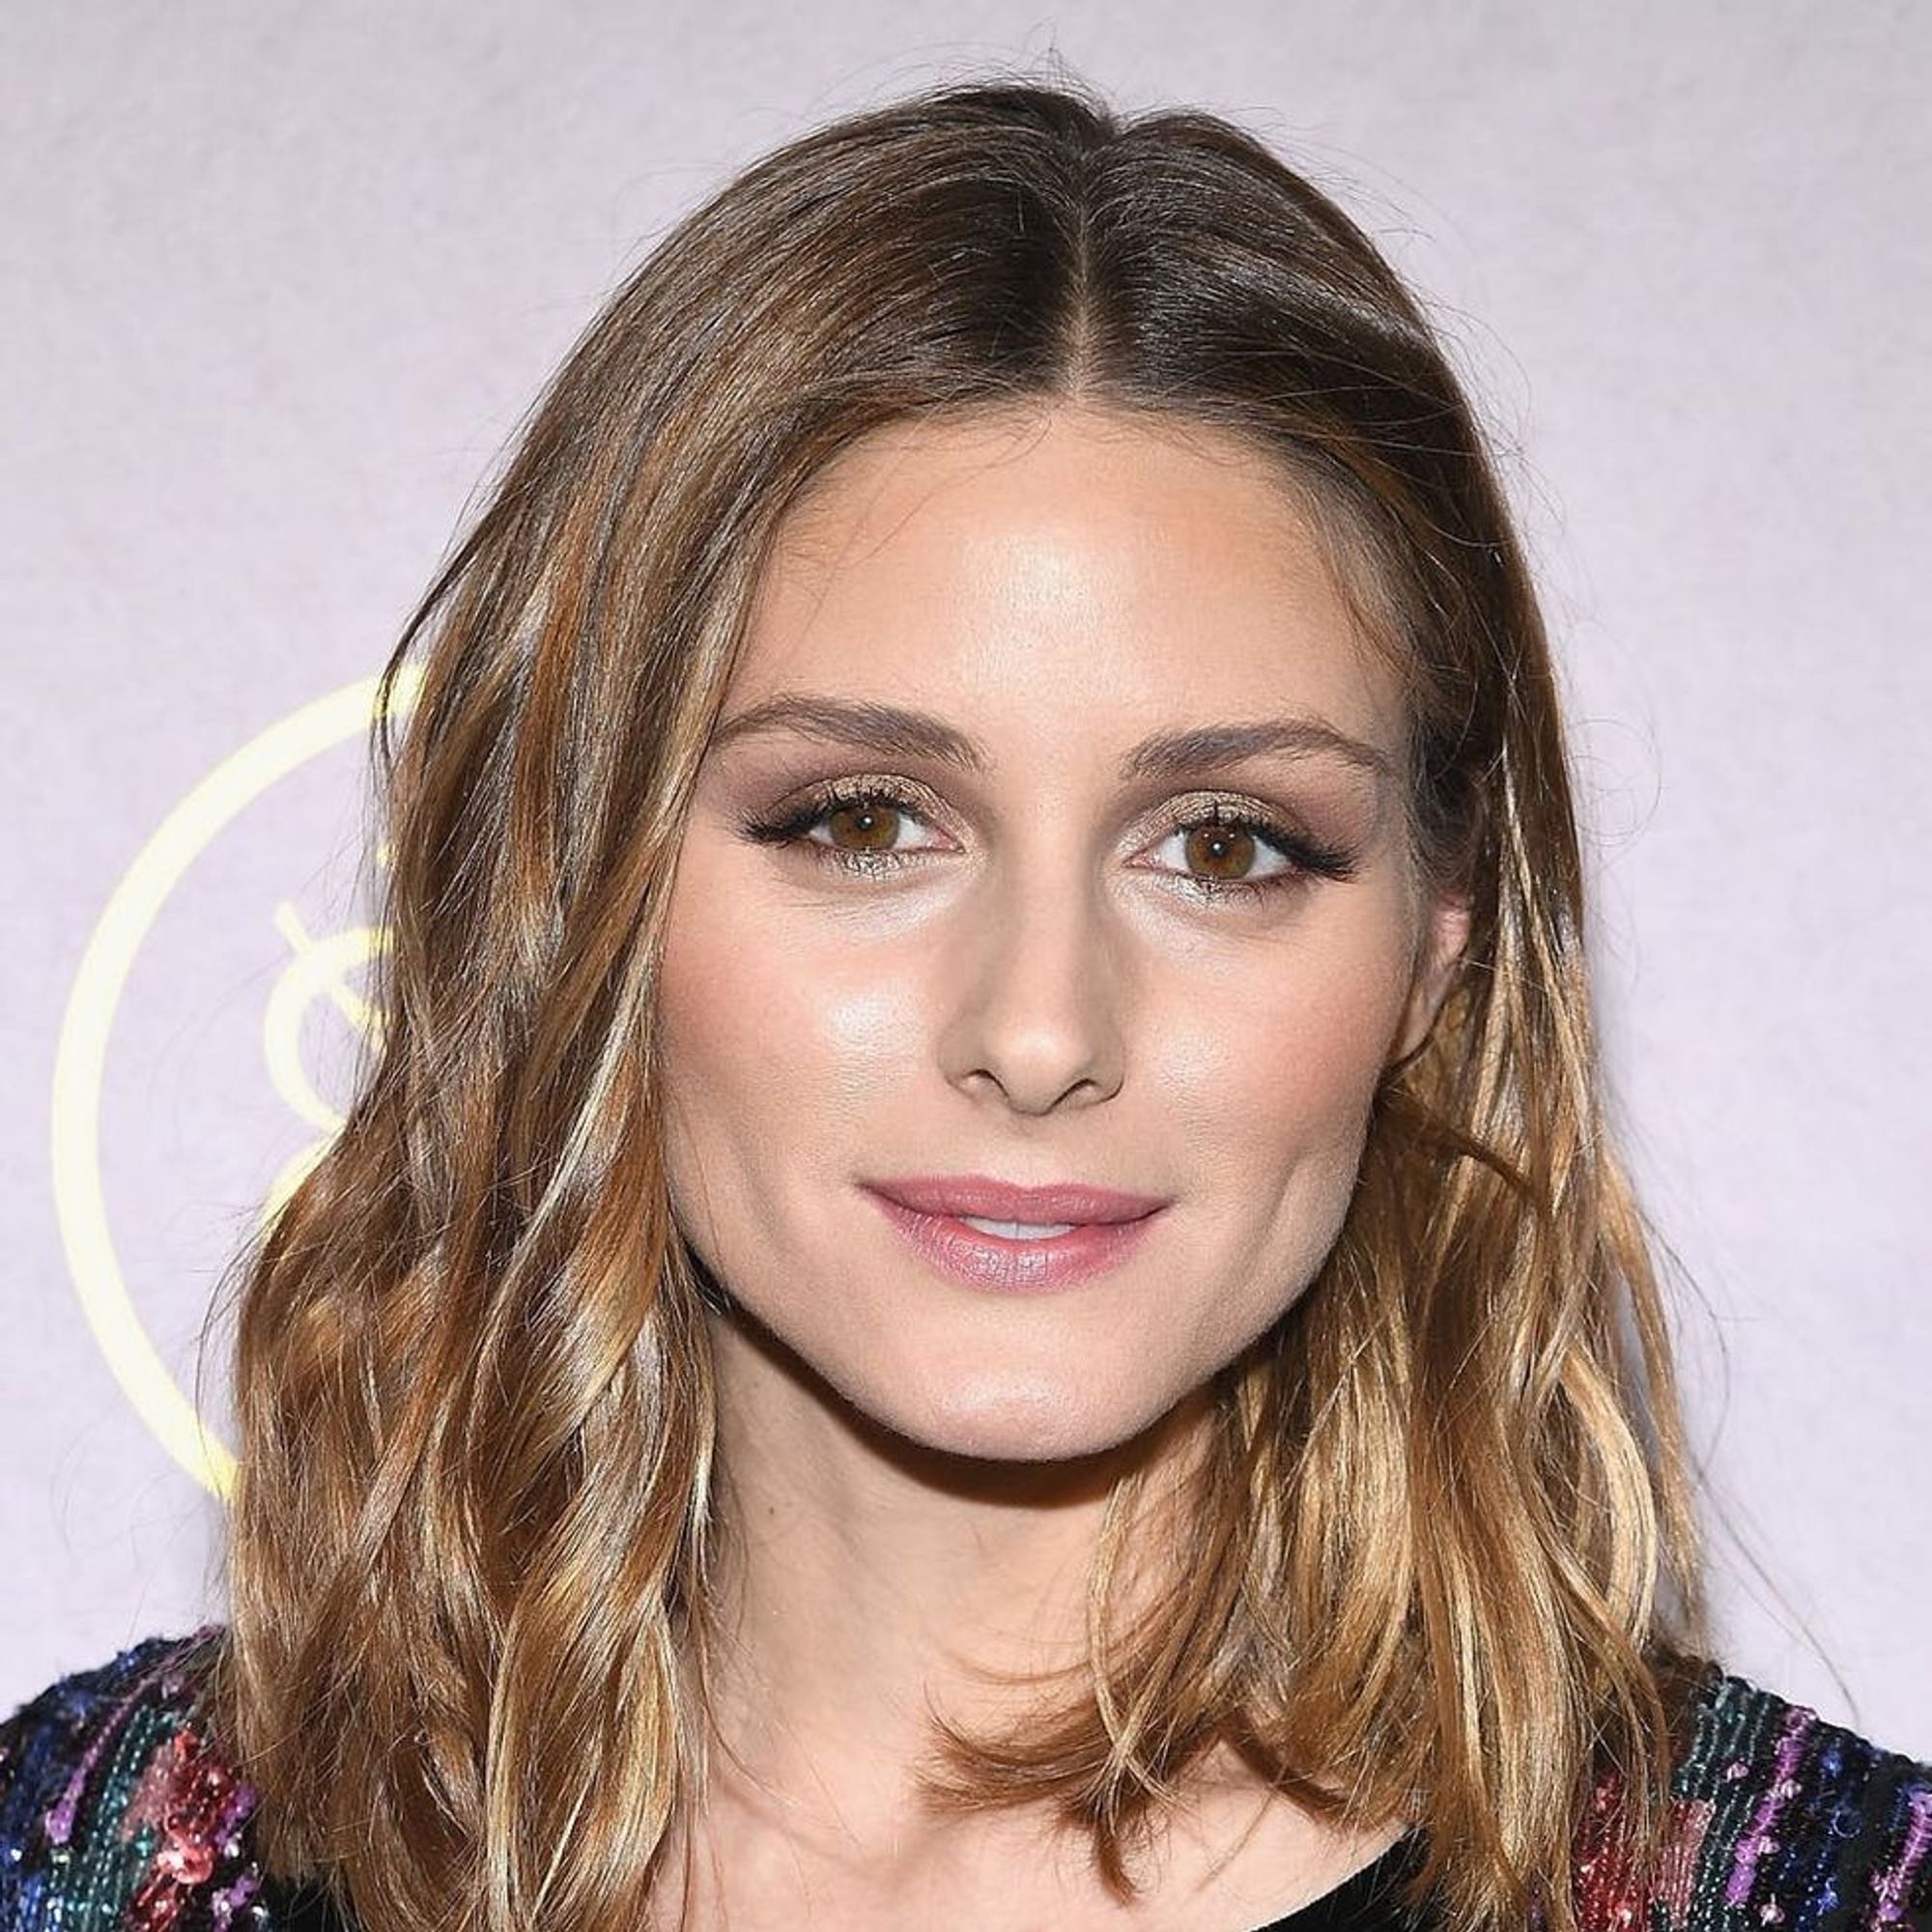 Olivia Palermo x Meli Melo Created the Must-Have Bag for Fall 2017 ...